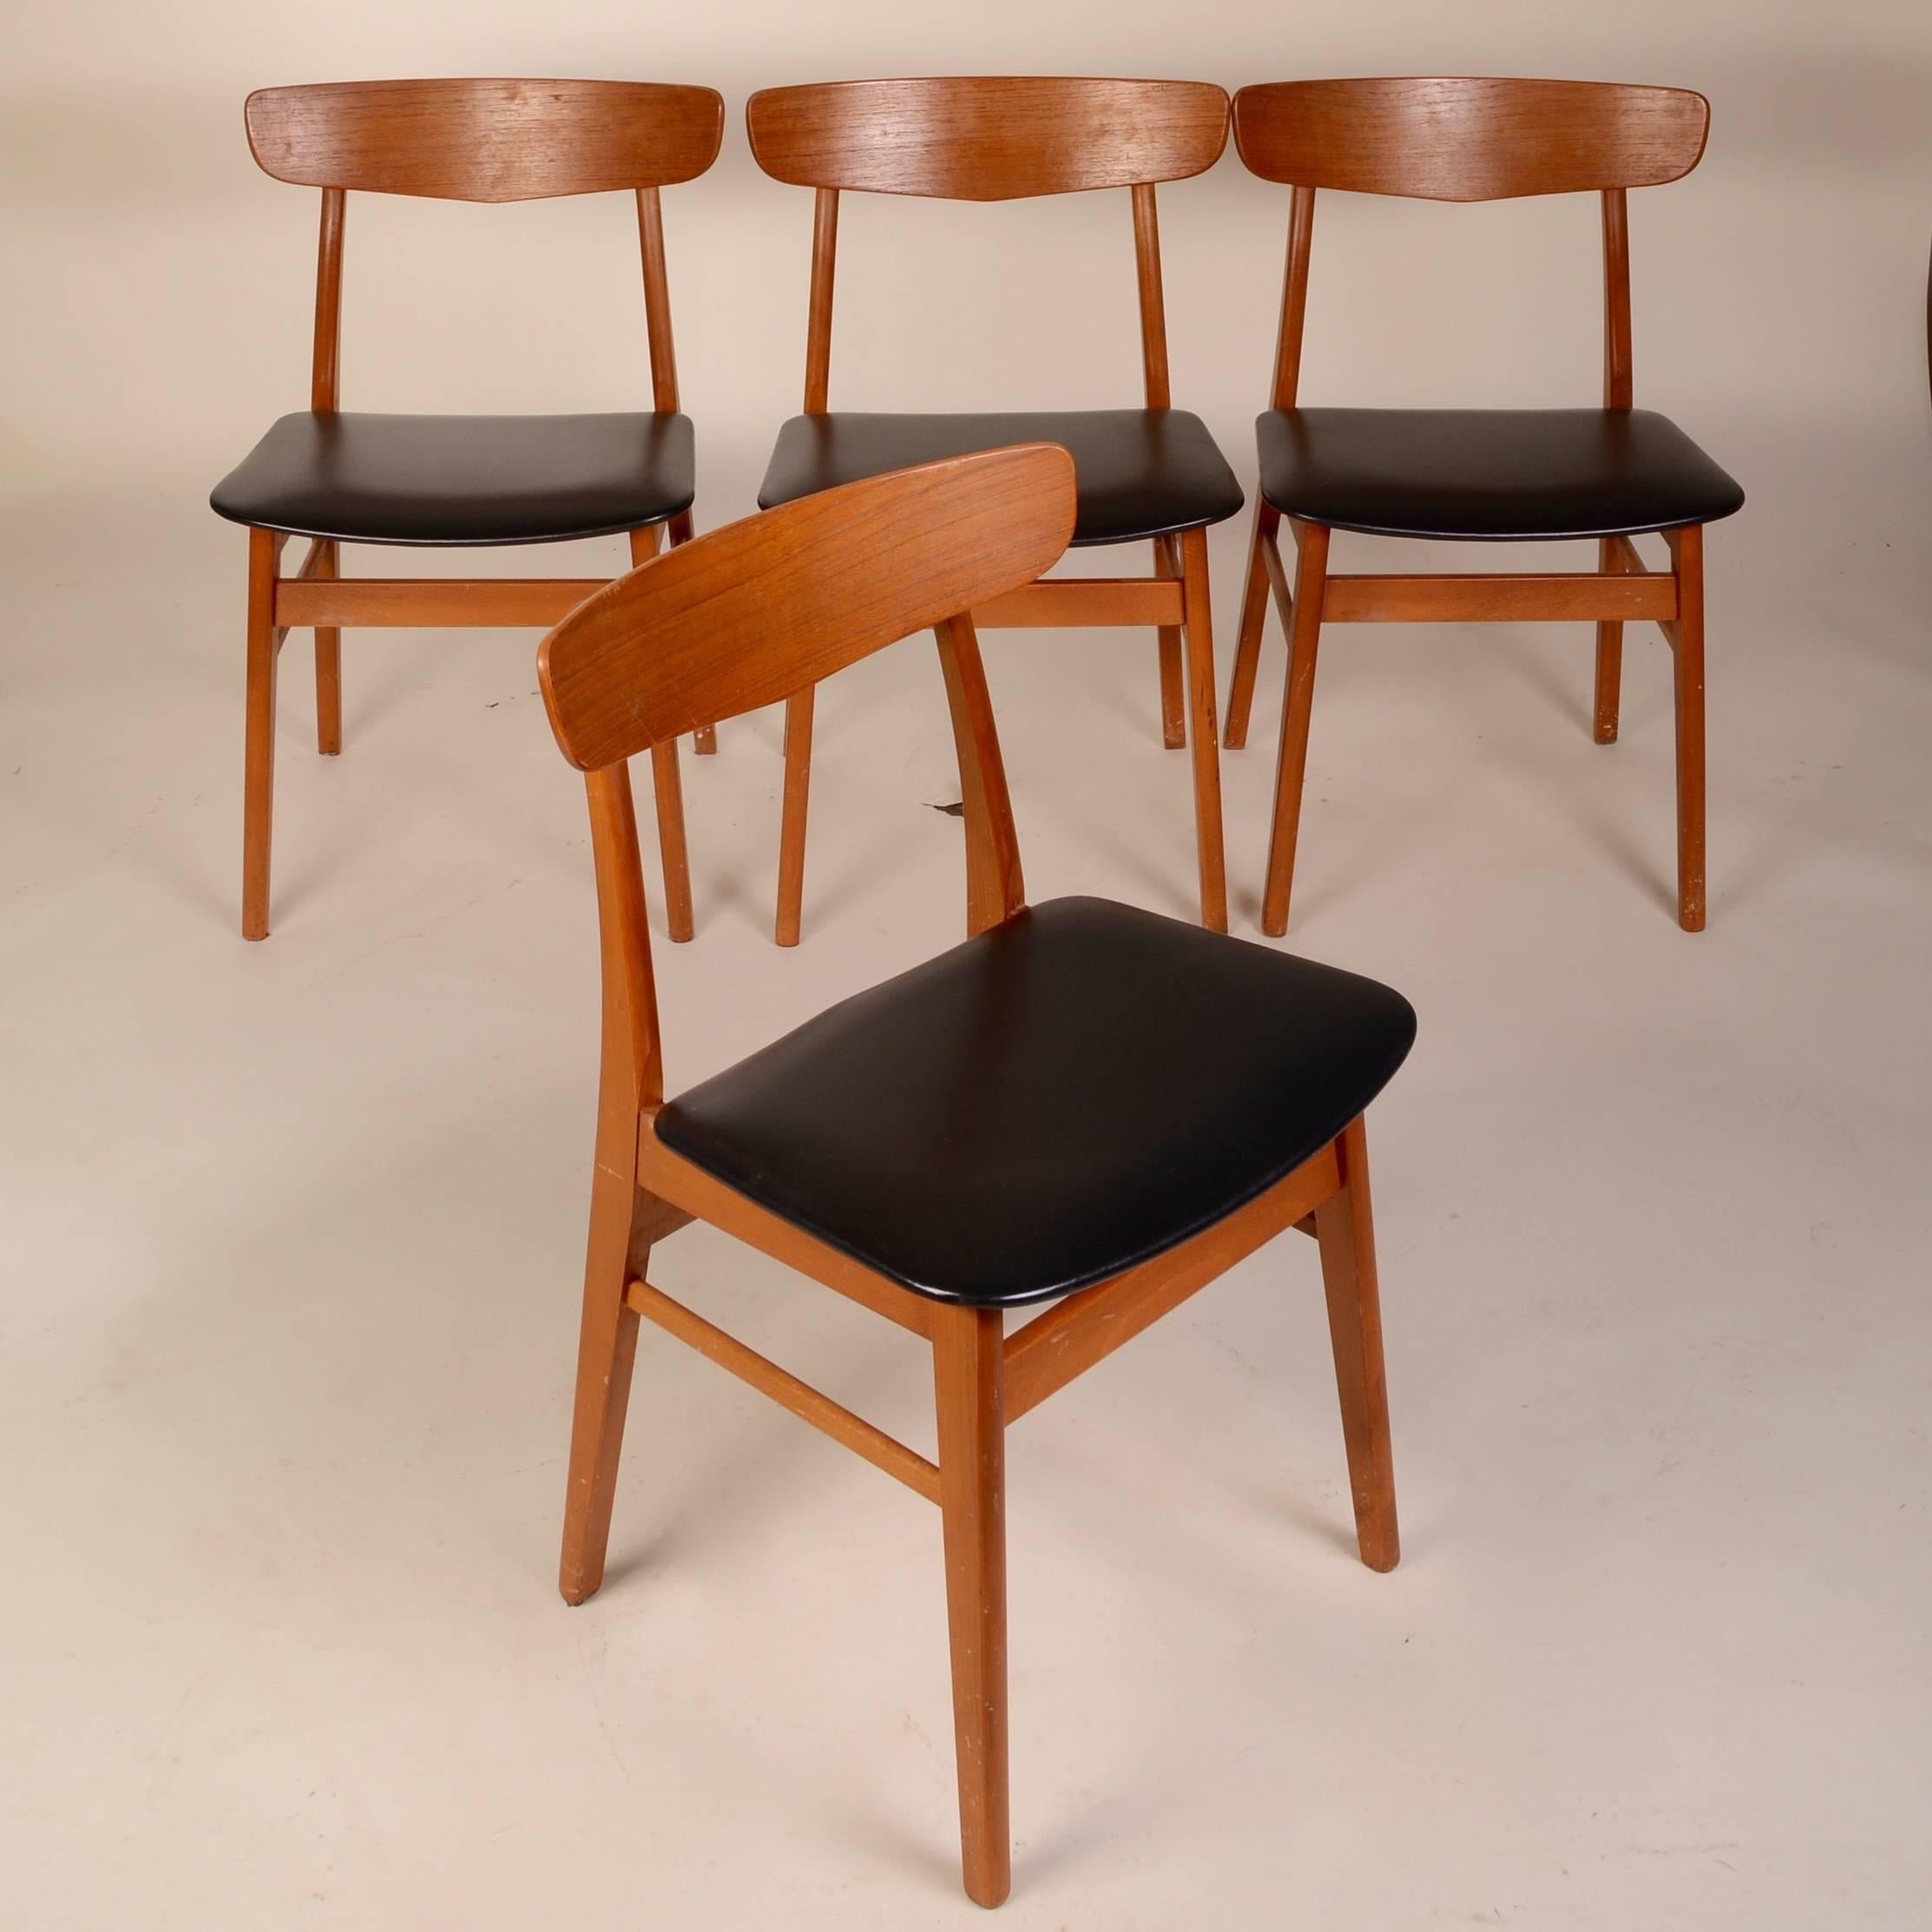 Mid-20th Century Set of Four Teak and Birch Danish Dining Chairs For Sale